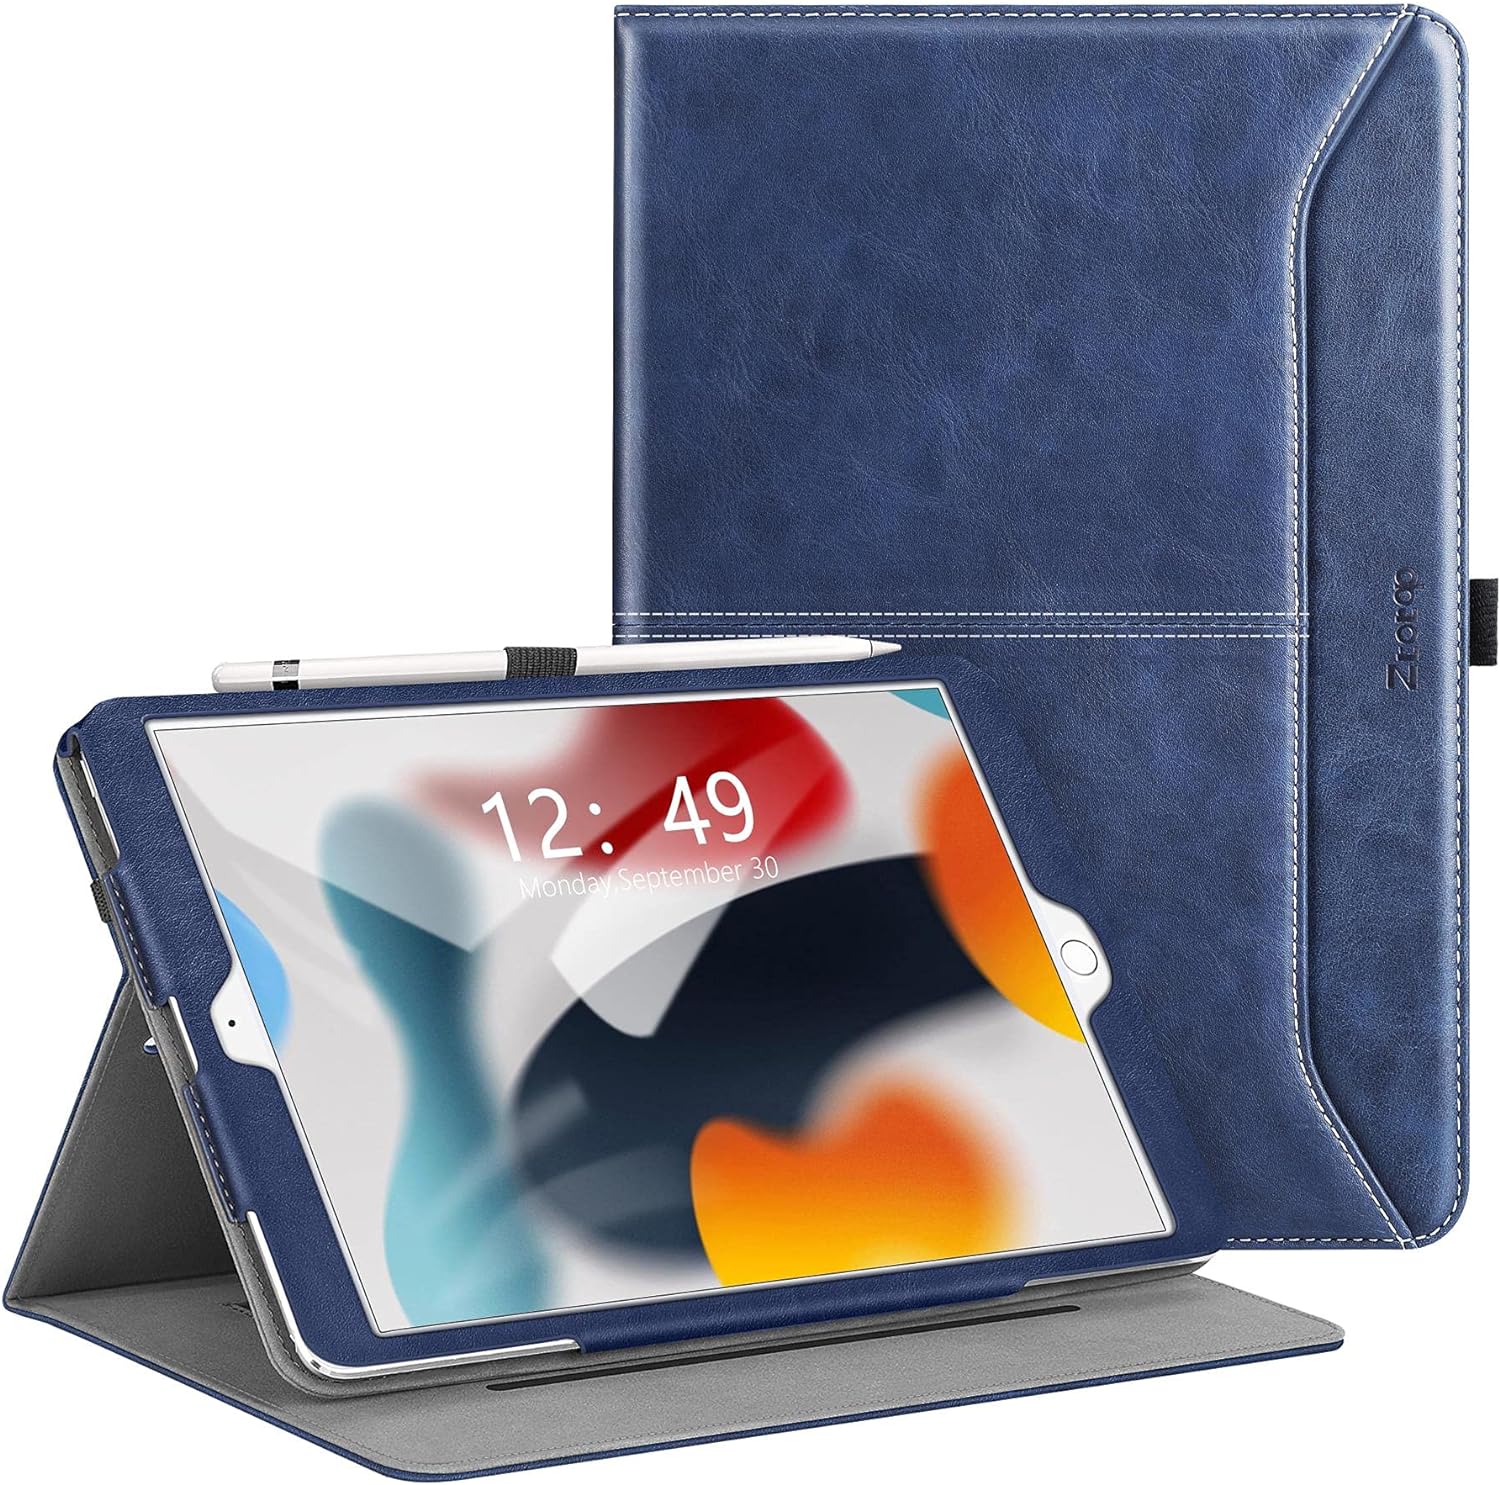 ZtotopCases for iPad 9th / 8th / 7th Generation, 10.2-Inch (2021/2020/2019 Model, iPad 9/8/7), Premium Leather Business Cover with Auto Wake / Sleep Function